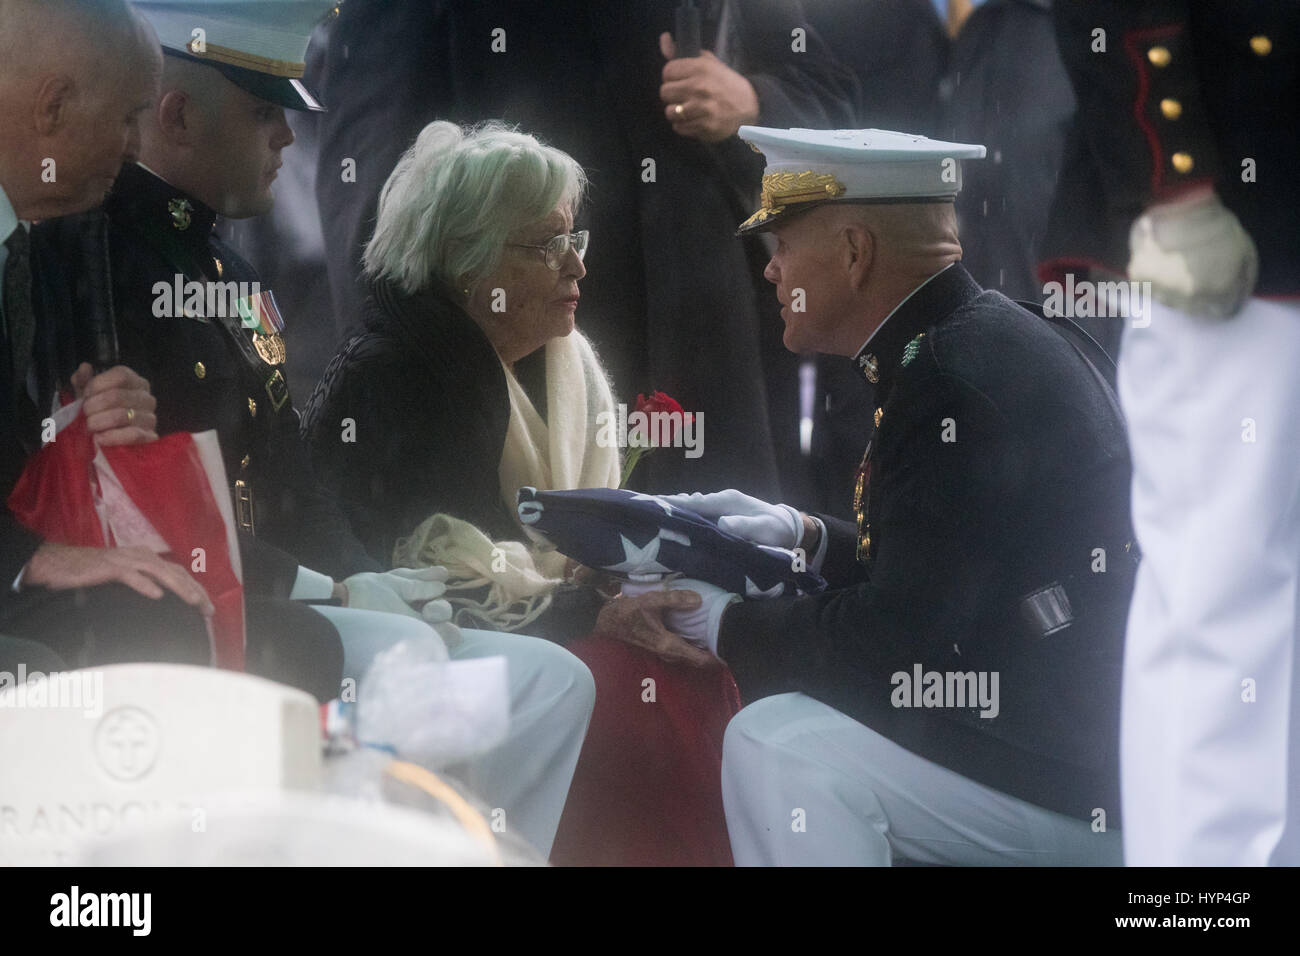 Arlington, United States Of America. 06th Apr, 2017. Commandant of the Marine Corps Gen. Robert Neller, right, presents the flag to Anne Glenn, widow of John Glenn, during the graveside service in Section 35 of Arlington National Cemetery April 6, 2017 in Arlington, Virginia. Glenn, the first American astronaut to orbit the Earth and later a United States senator, died at the age of 95 on December 8, 2016. Credit: Planetpix/Alamy Live News Stock Photo